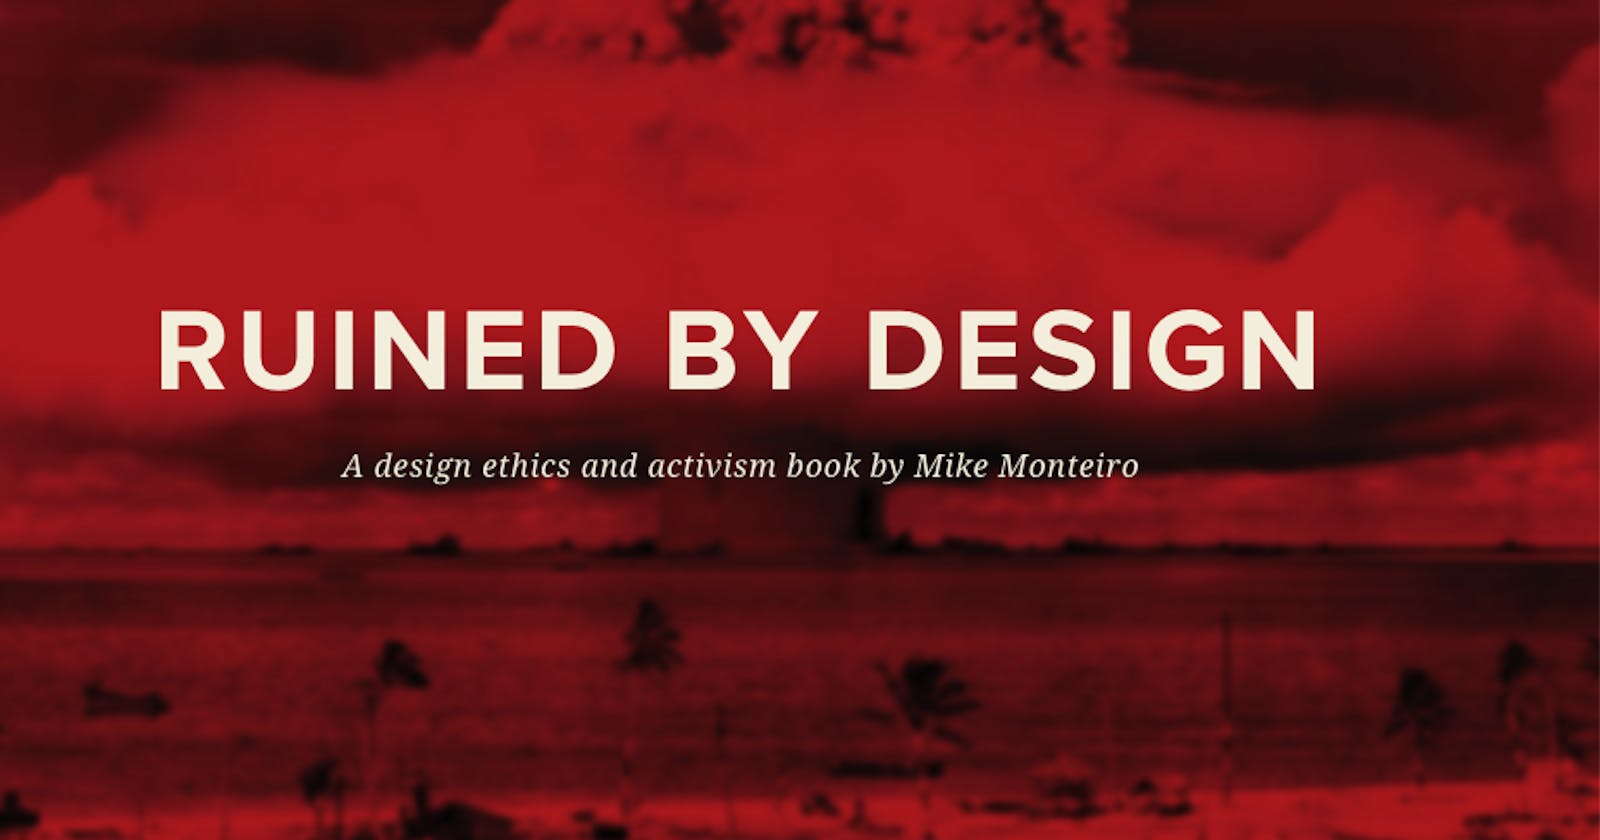 Ruined By Design by Mike Monteiro - 书评：《被设计毁掉的世界》